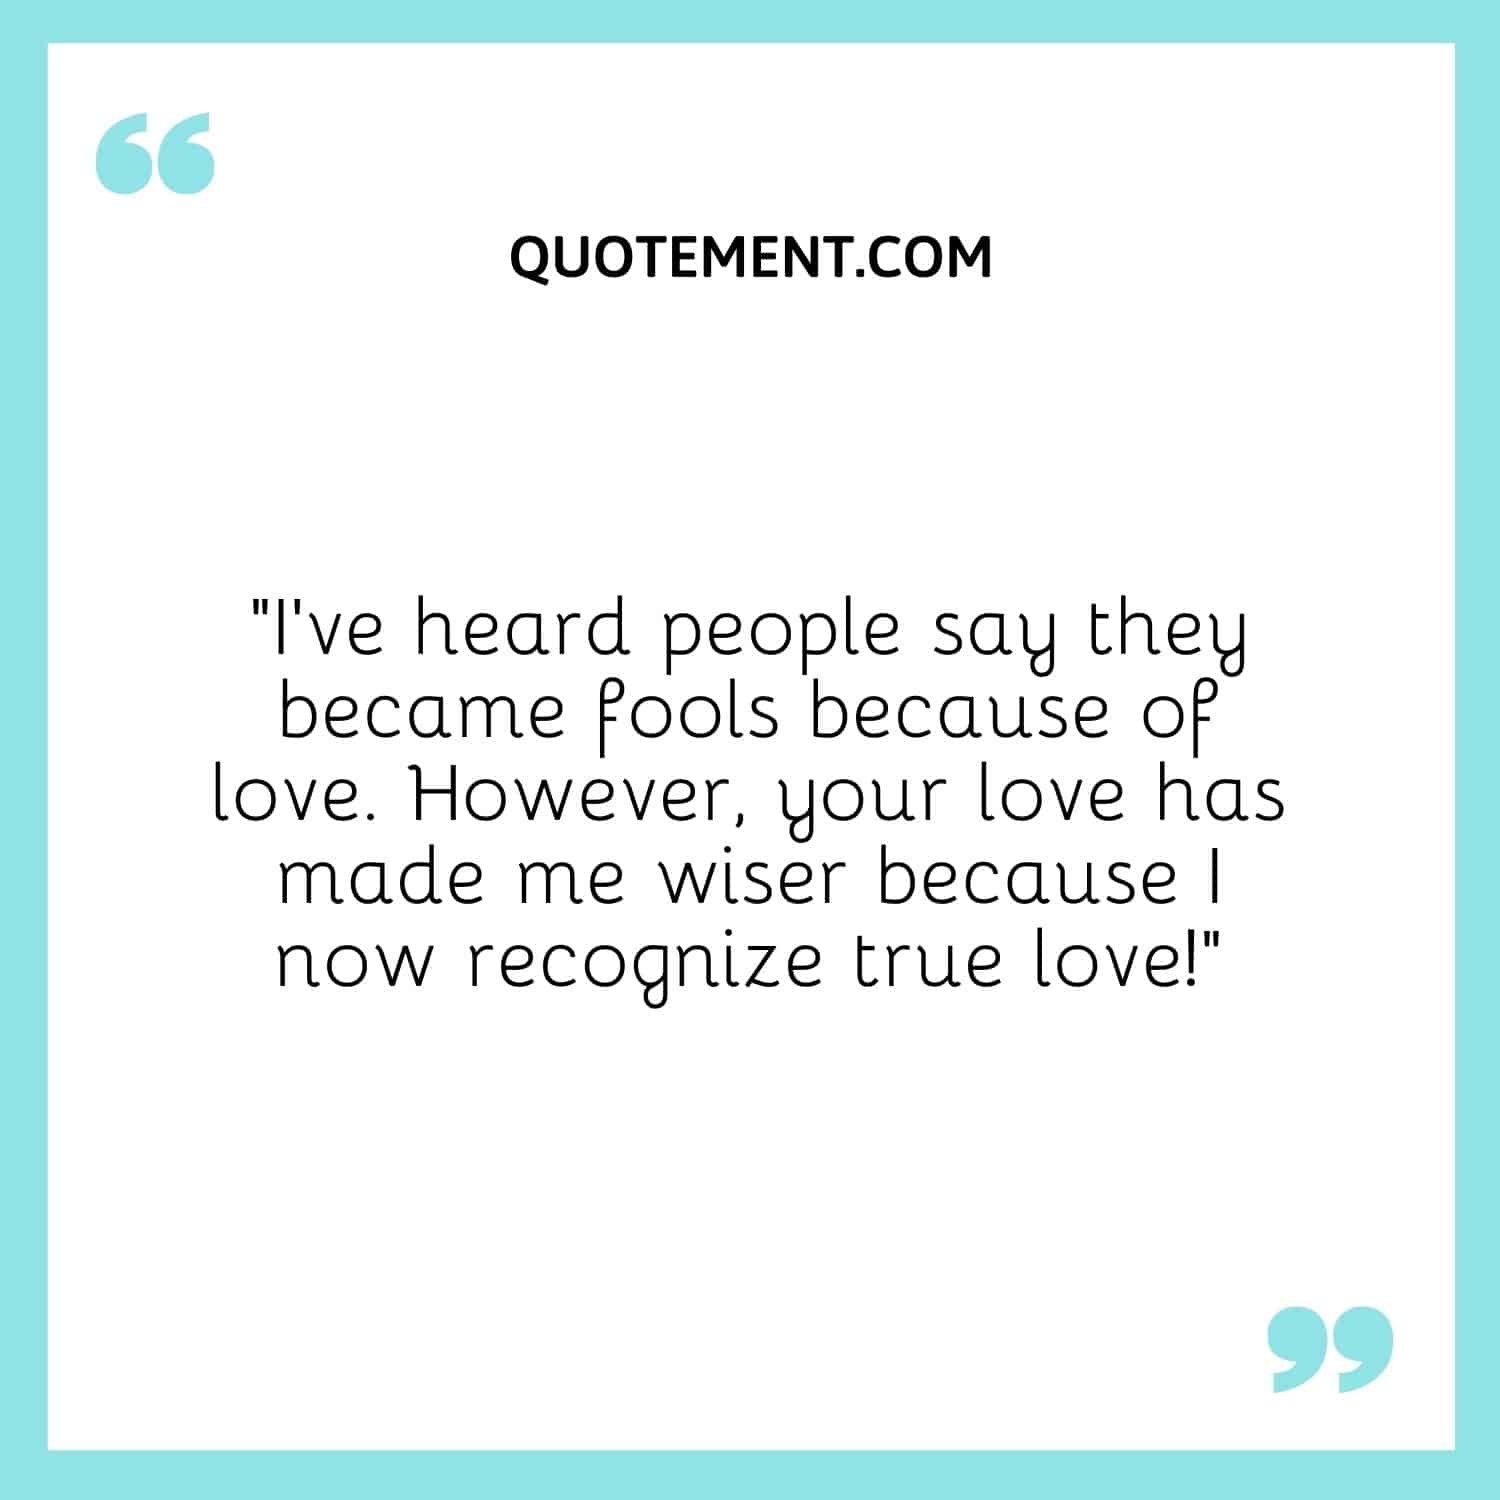 “I’ve heard people say they became fools because of love. However, your love has made me wiser because I now recognize true love!”